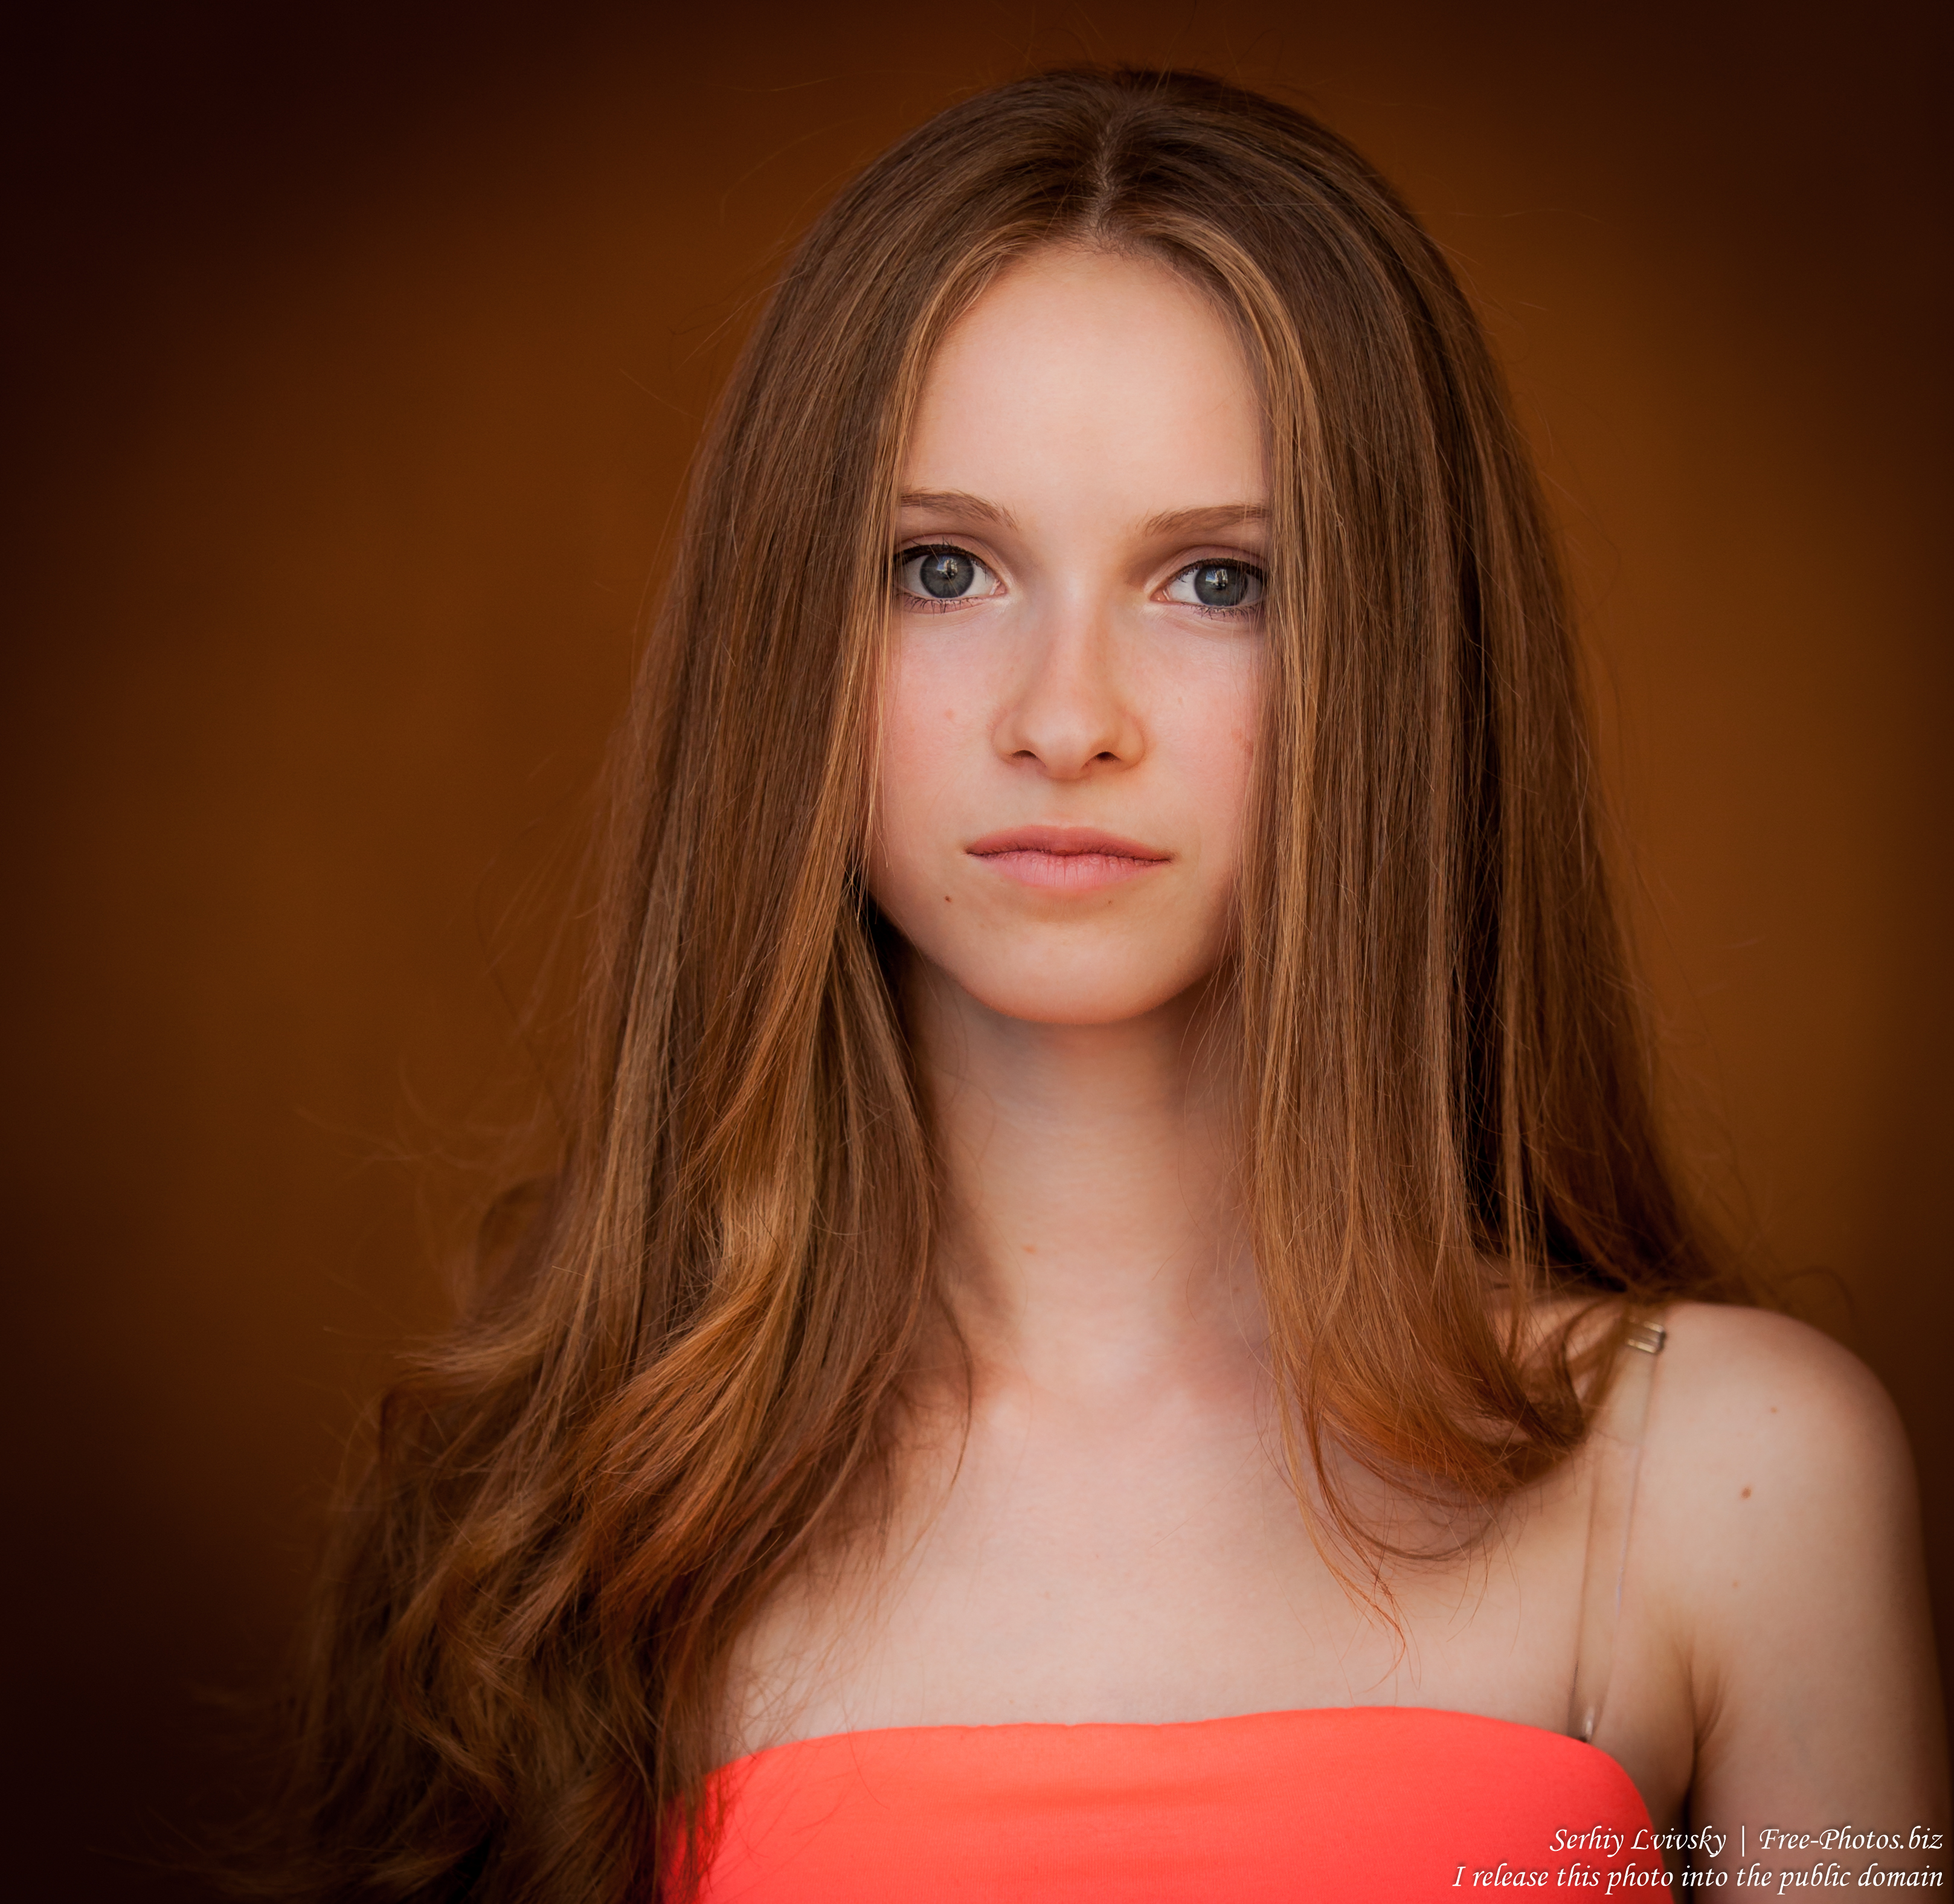 Photo of a 16-year-old girl photographed in August 2015 by Serhiy.